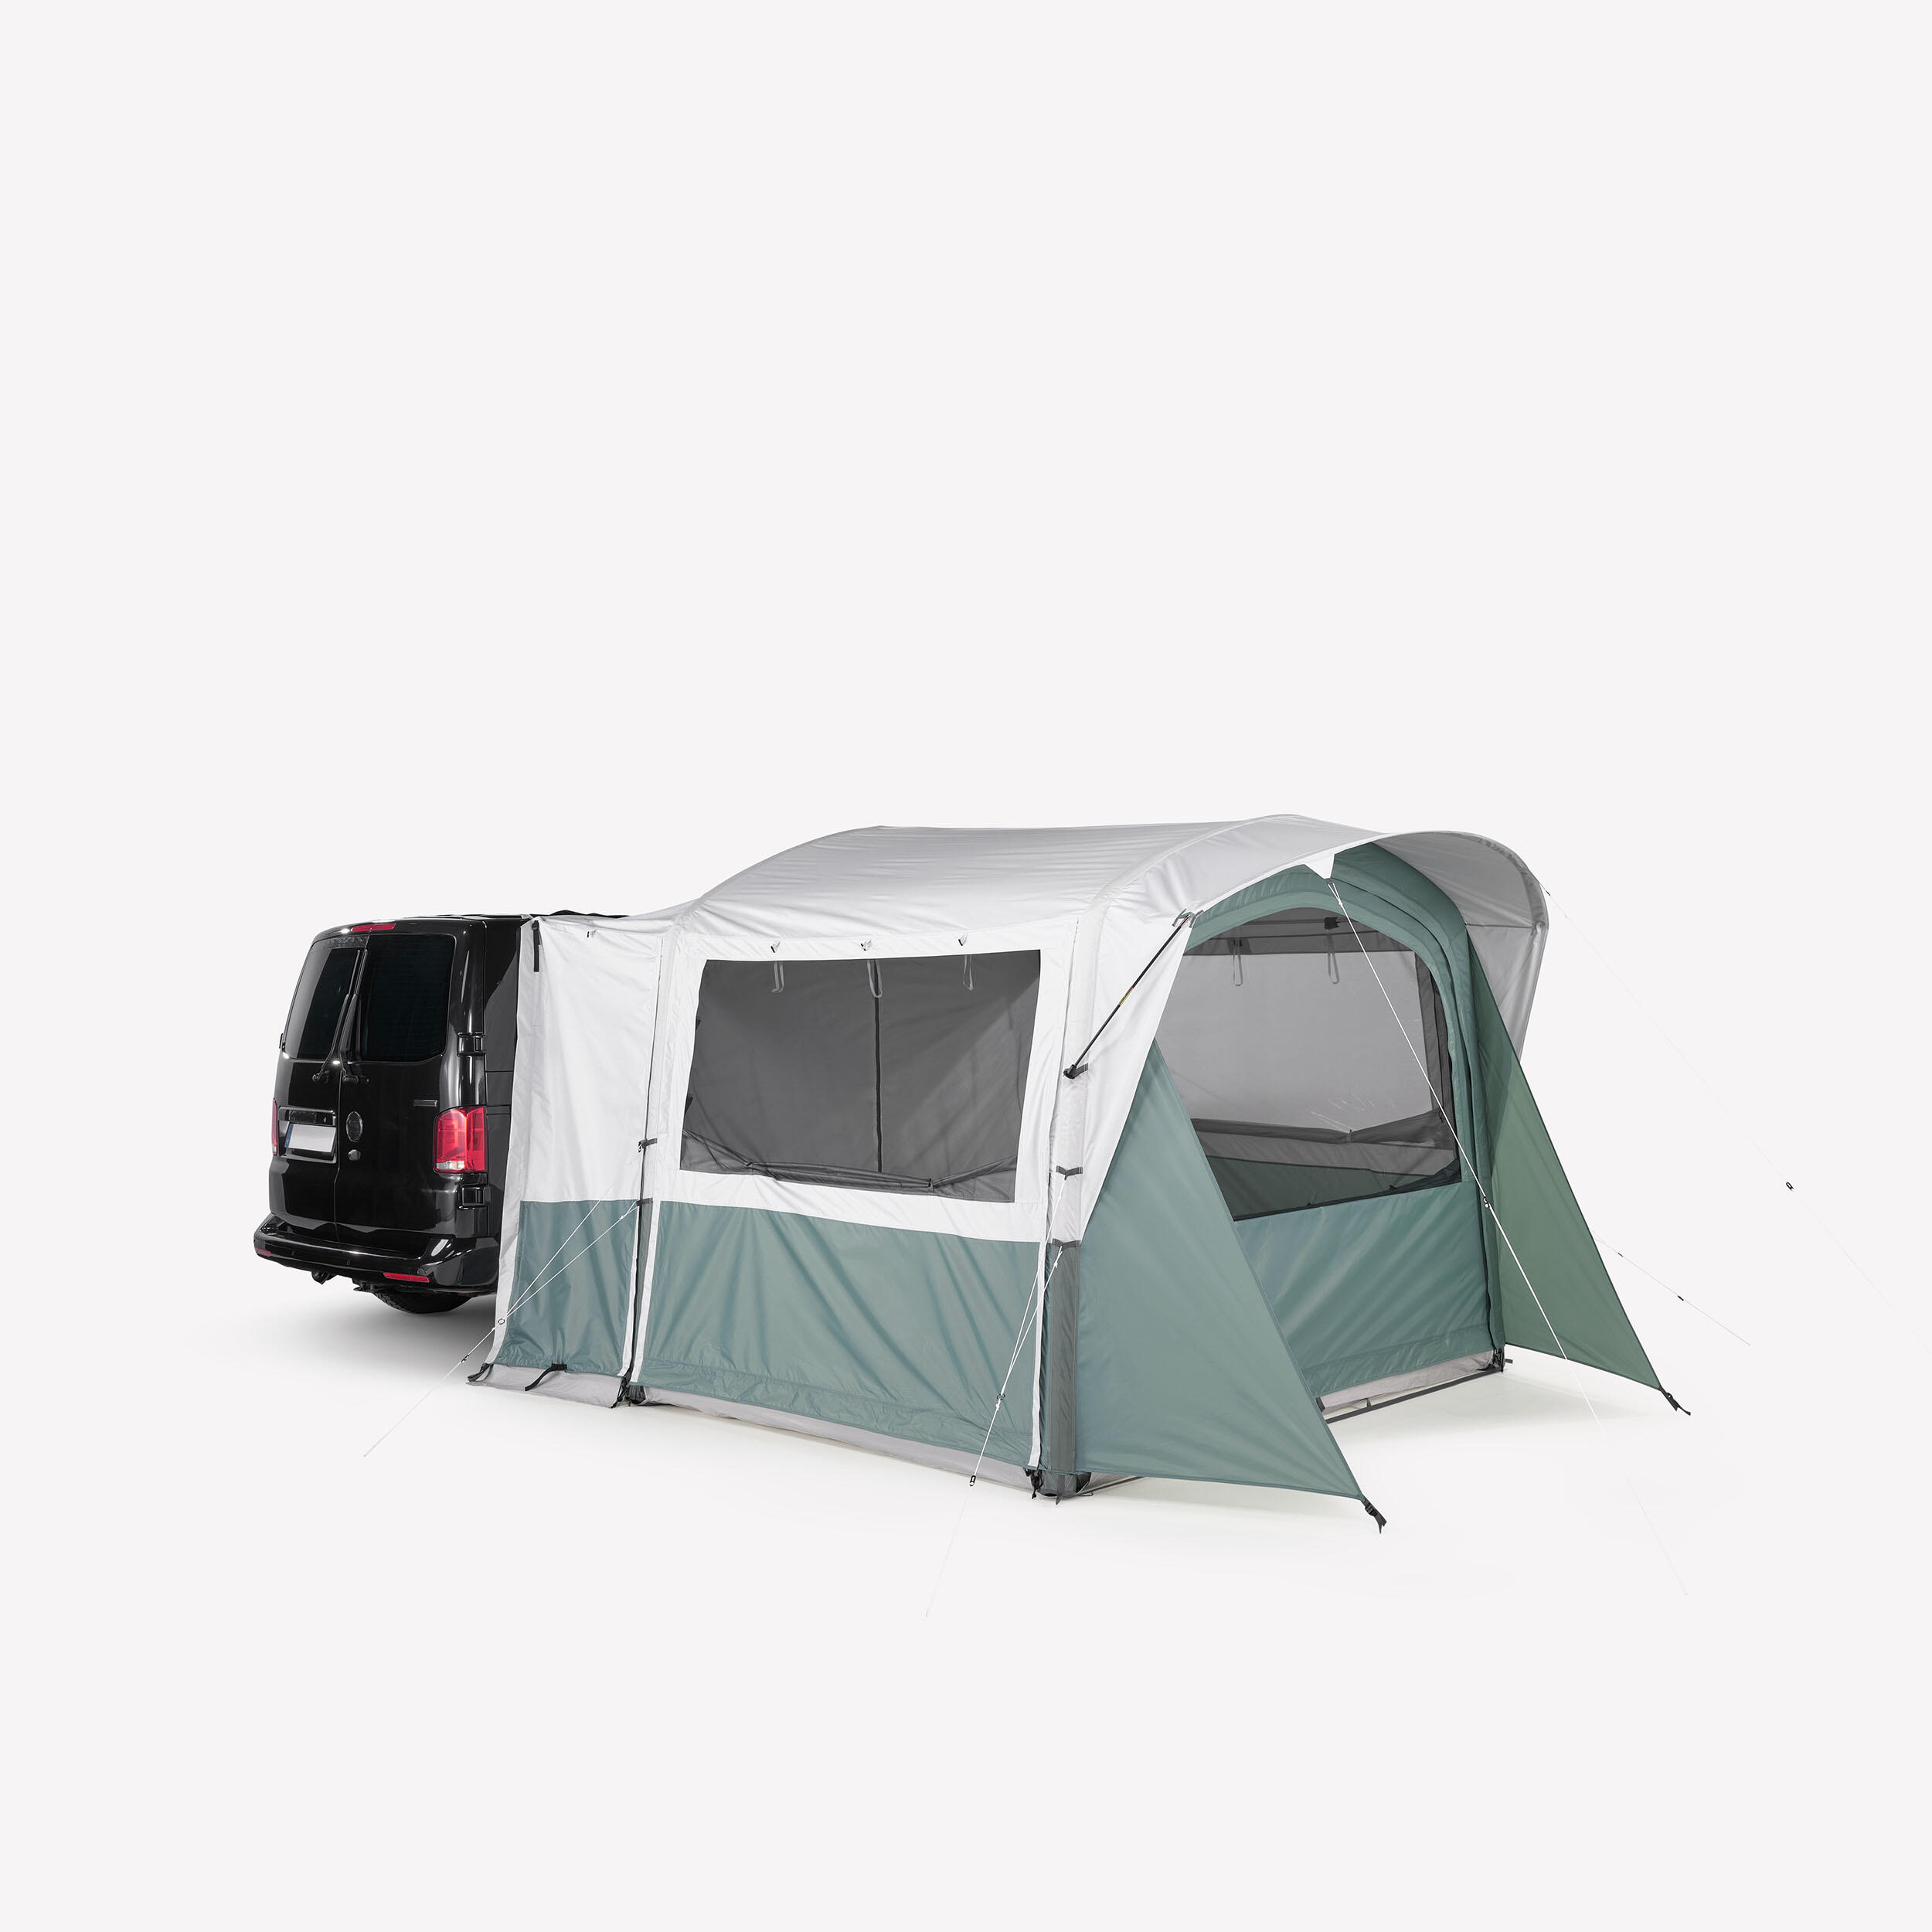 Van and truck inflatable canopy - Van Connect Air Seconds Fresh - 6 people 6/15